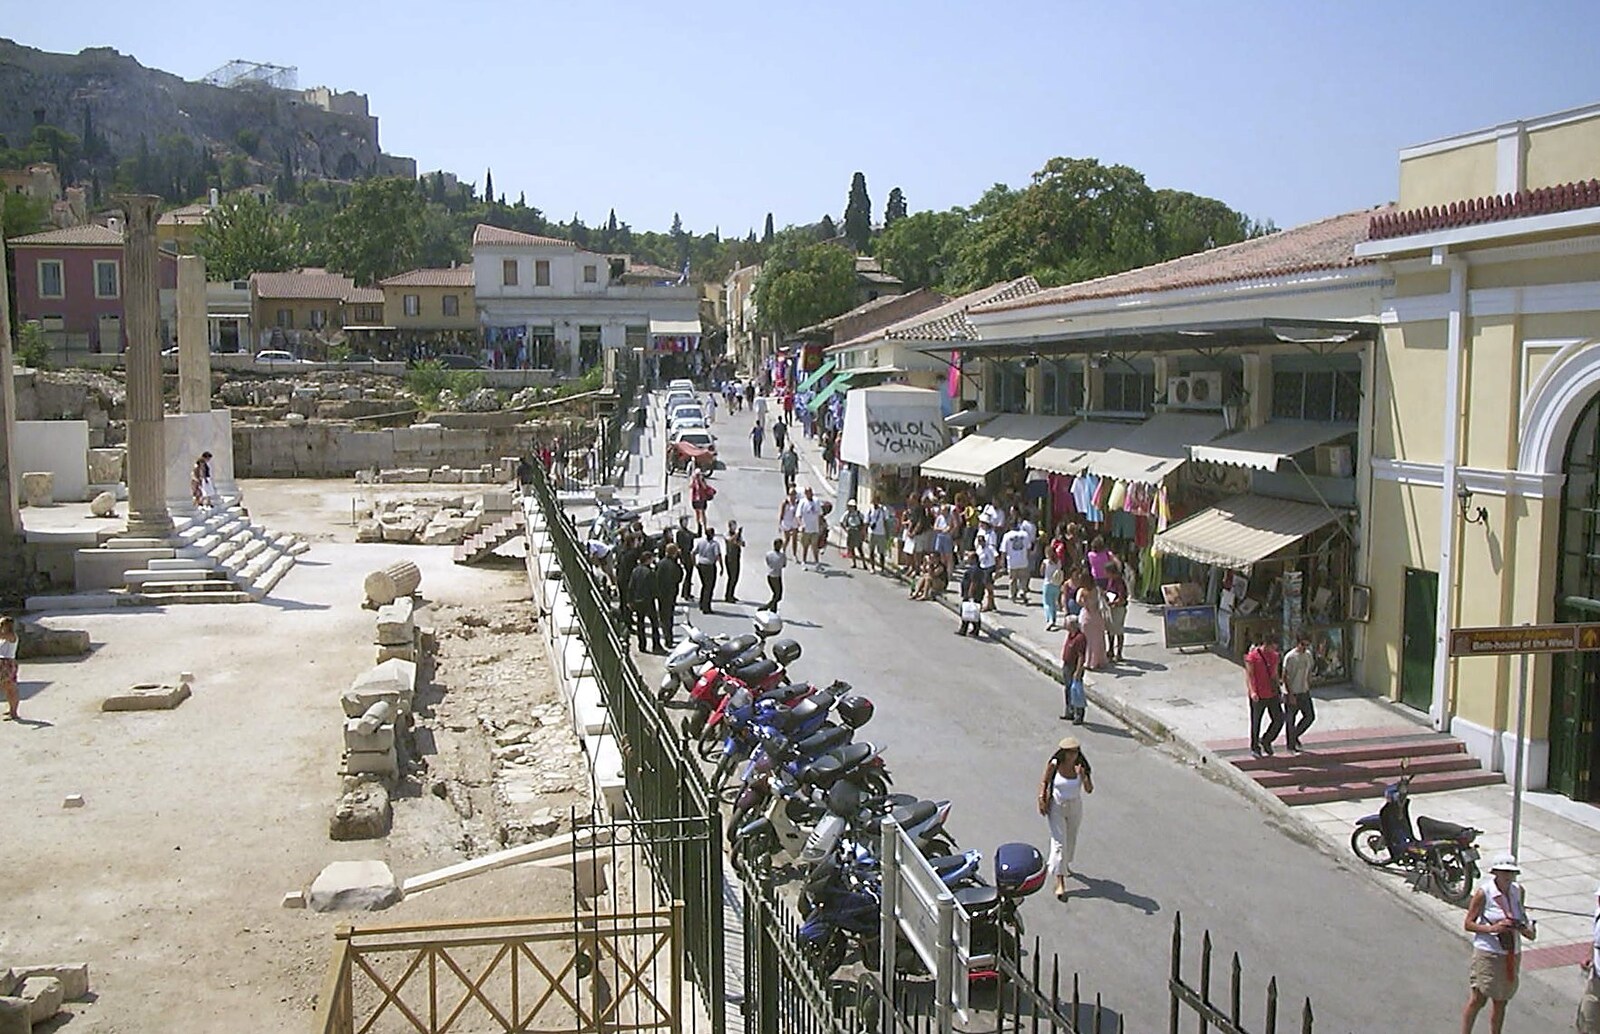 A Postcard From Athens: A Day Trip to the Olympics, Greece - 19th August 2004: Looking down on a busy street